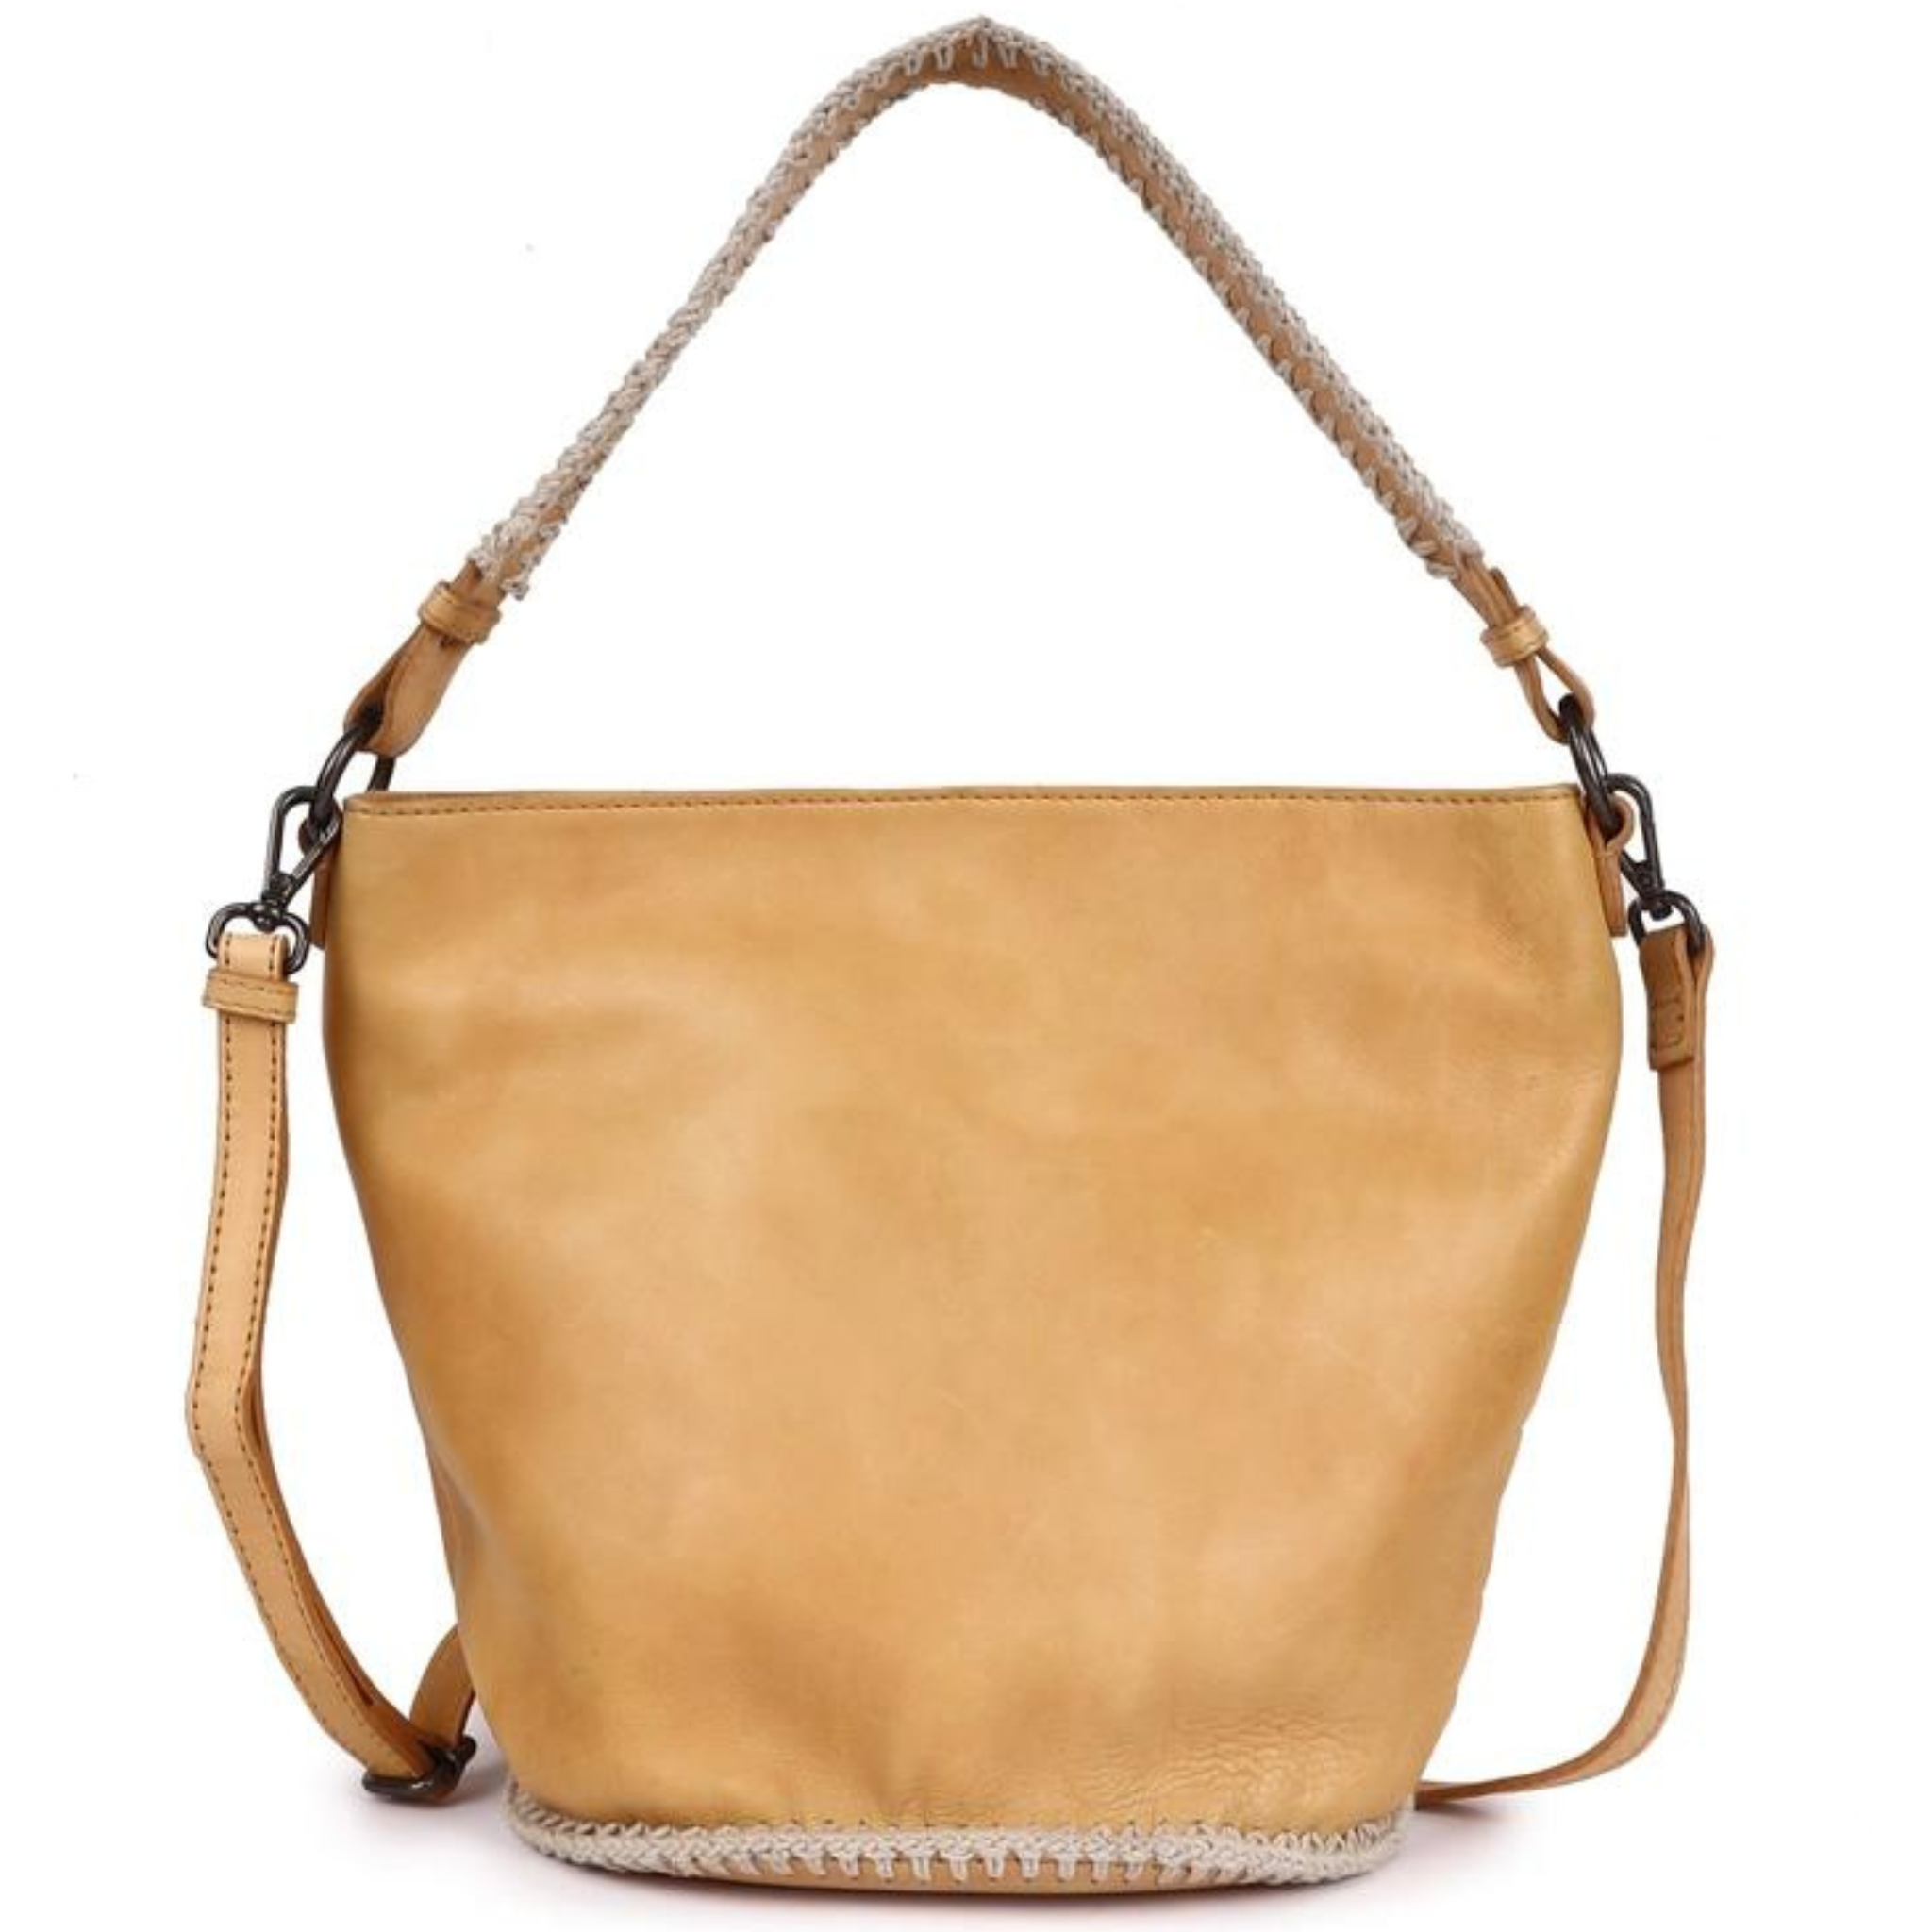 Patsy Handcrafted Leather Shoulder Bag/Crossbody